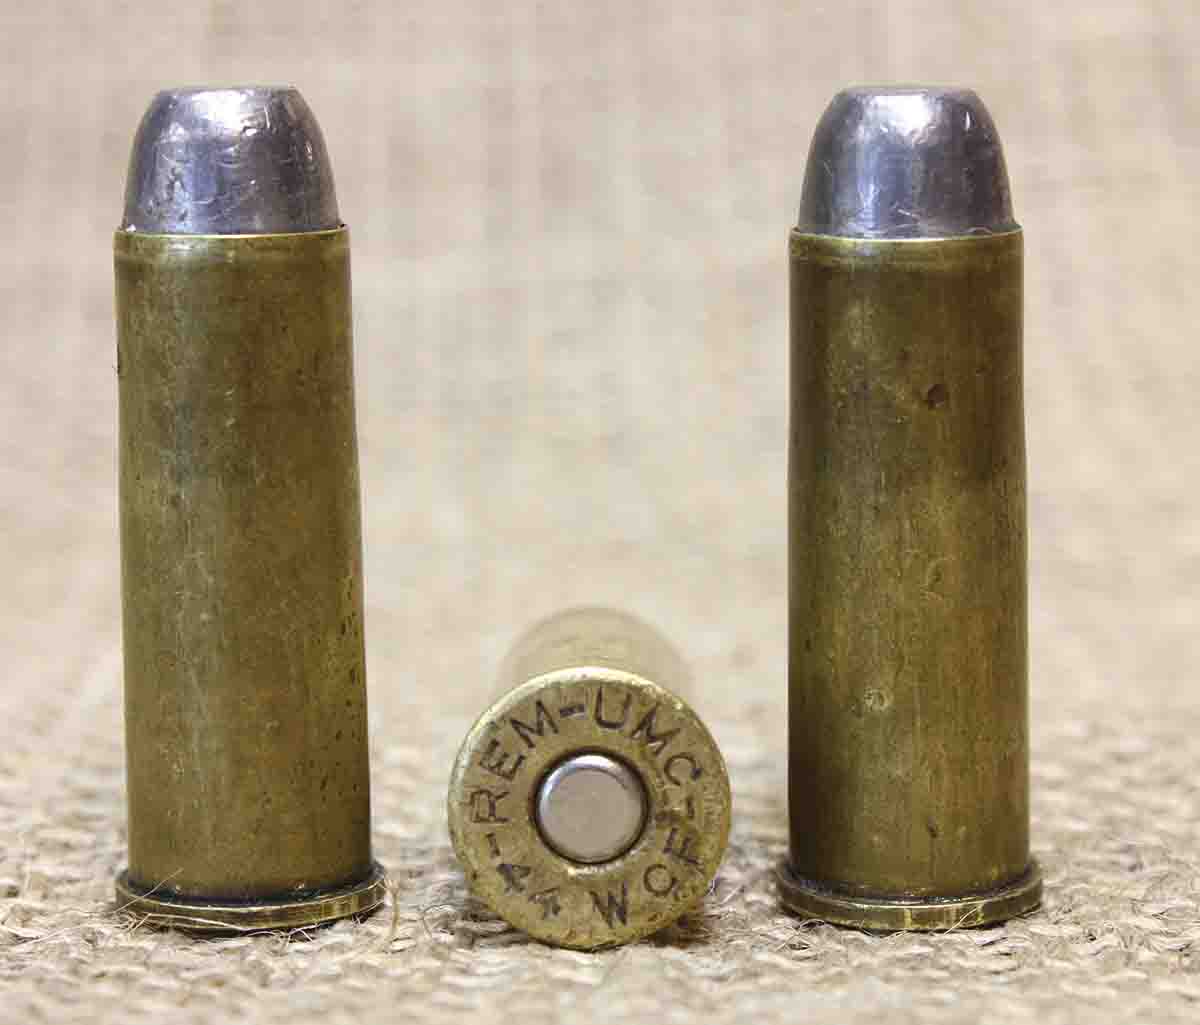 Deferring to the UMC loads that were disassembled, 36 grains of DuPont (now GOEX) FFg was used. Even with that load – 4 grains less than the often reported 40 grains of powder – the seated bullet compressed the powder charge about .130 inch when the bullet was correctly seated so that the case mouth could crimp over the top driving band of the bullet.